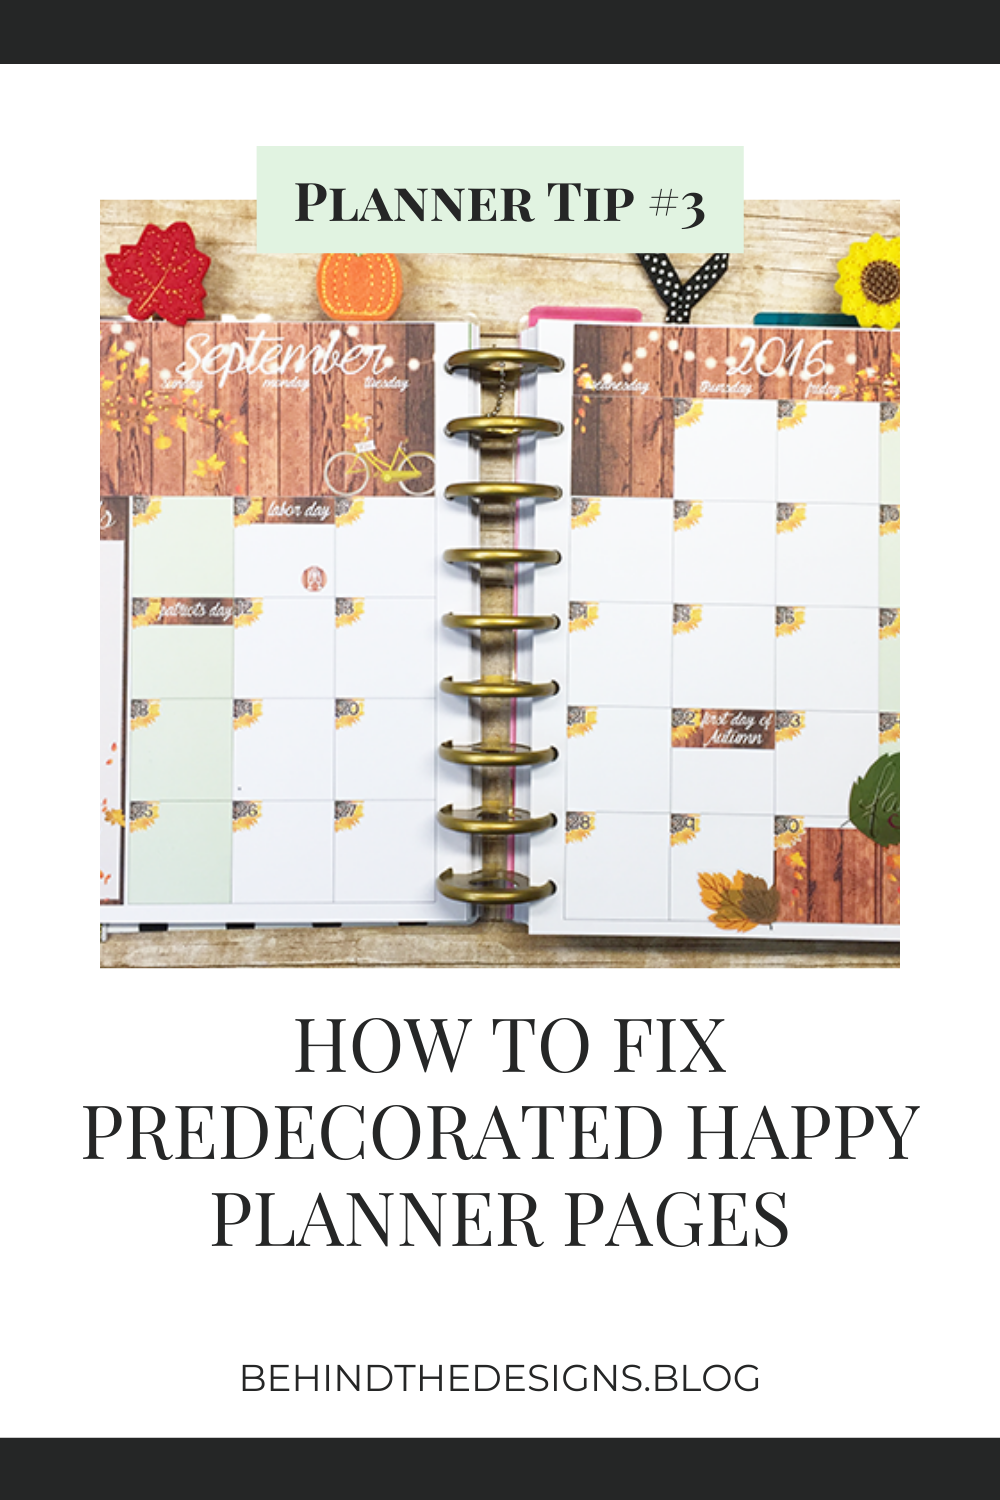 How to Fix Pre-Decorated Happy Planner Pages